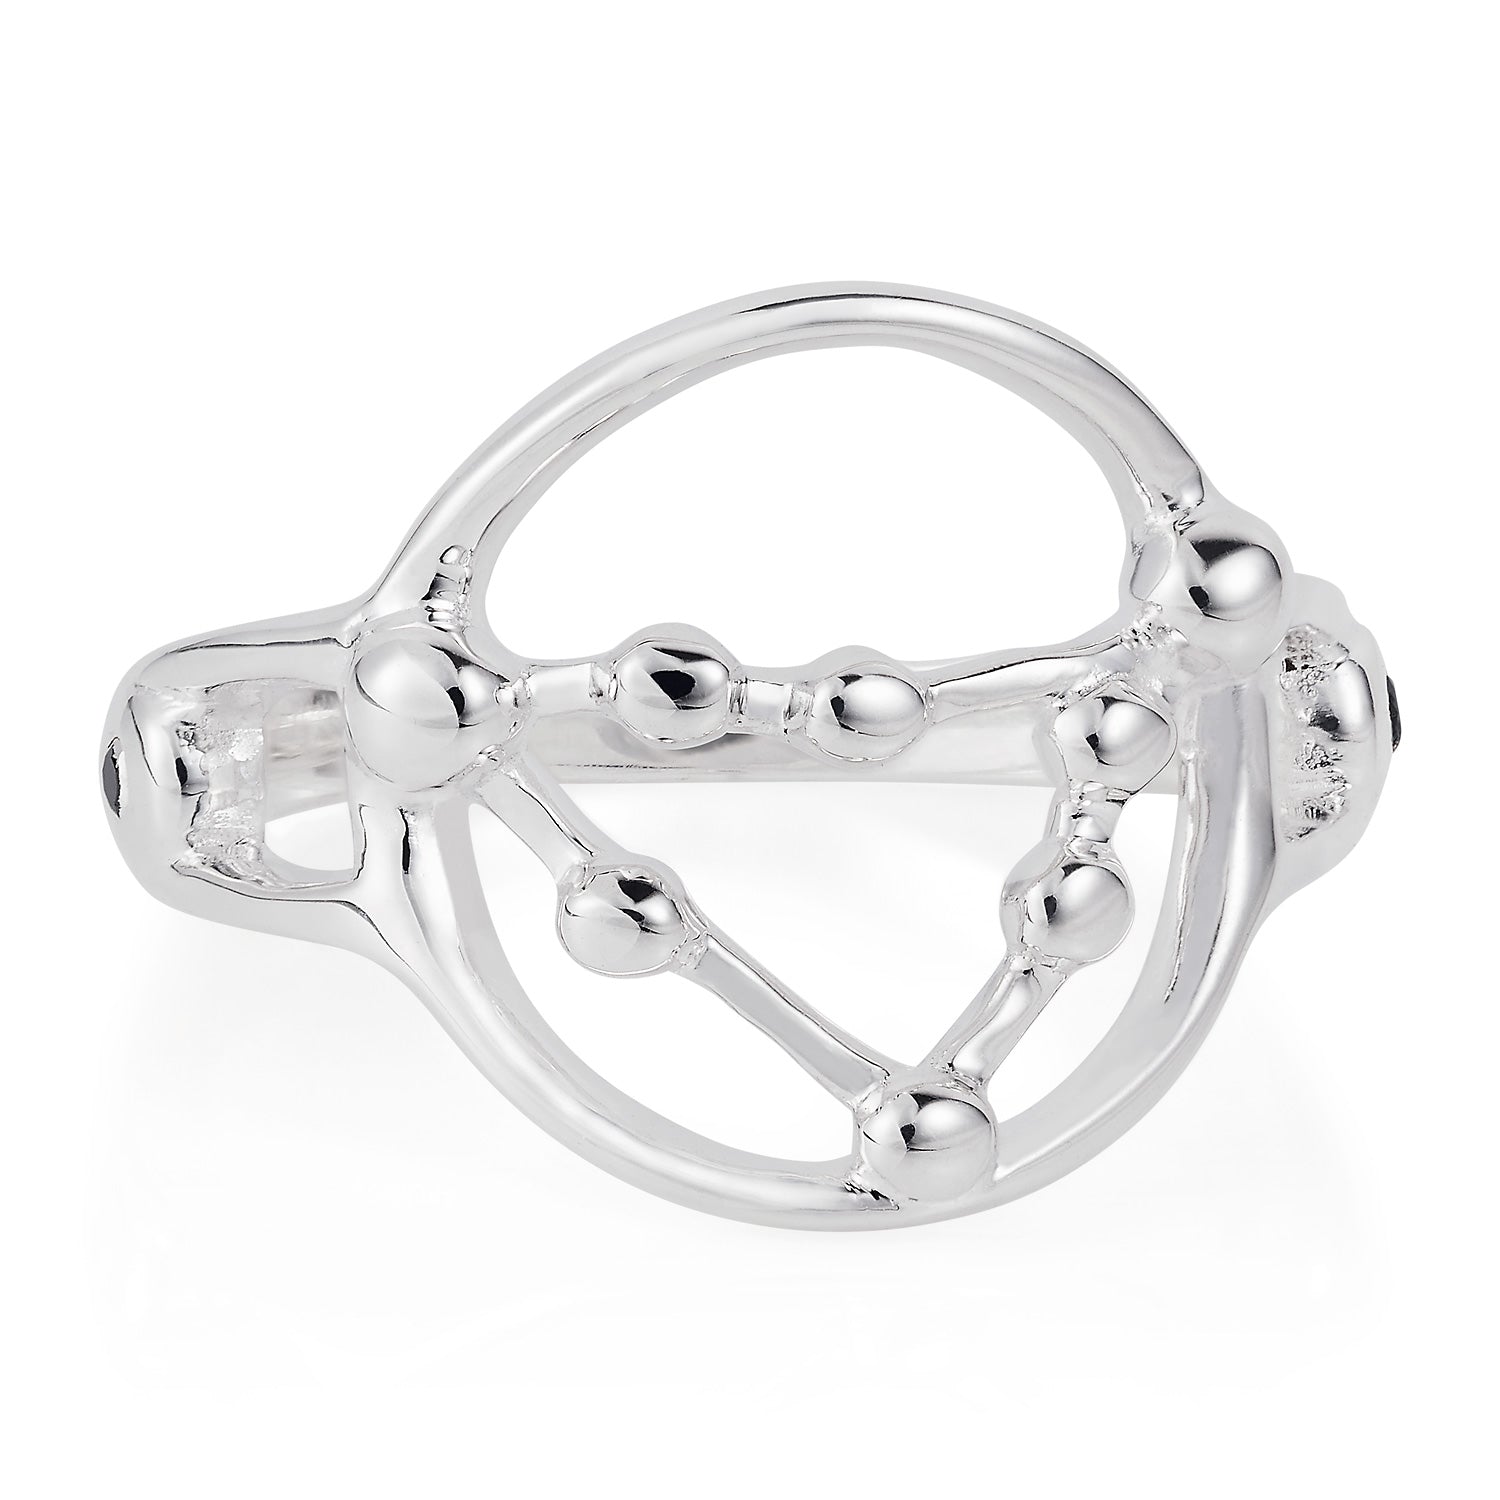 Star Sign Constellation Silver Ring by Yasmin Everley